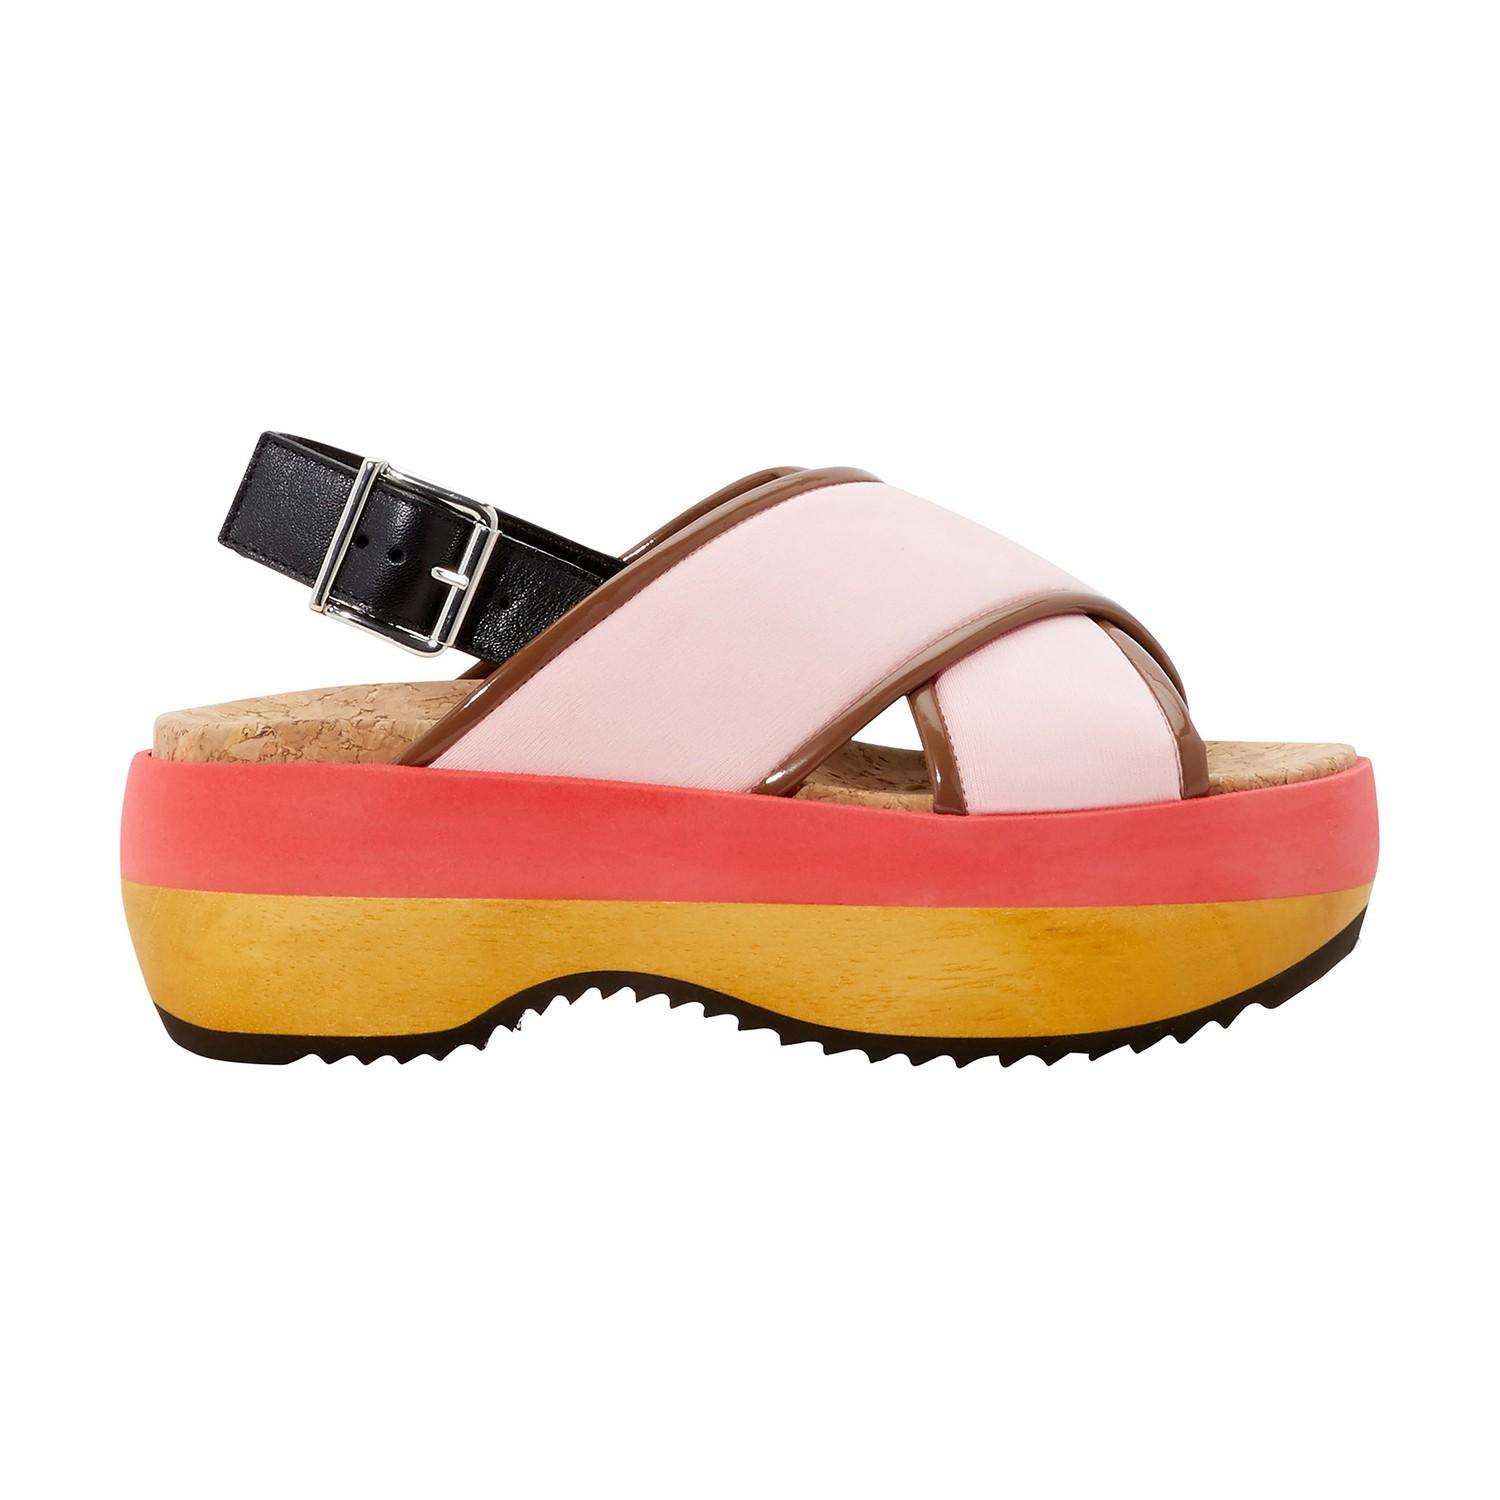 Marni Wedge Sandals in Pink - Lyst